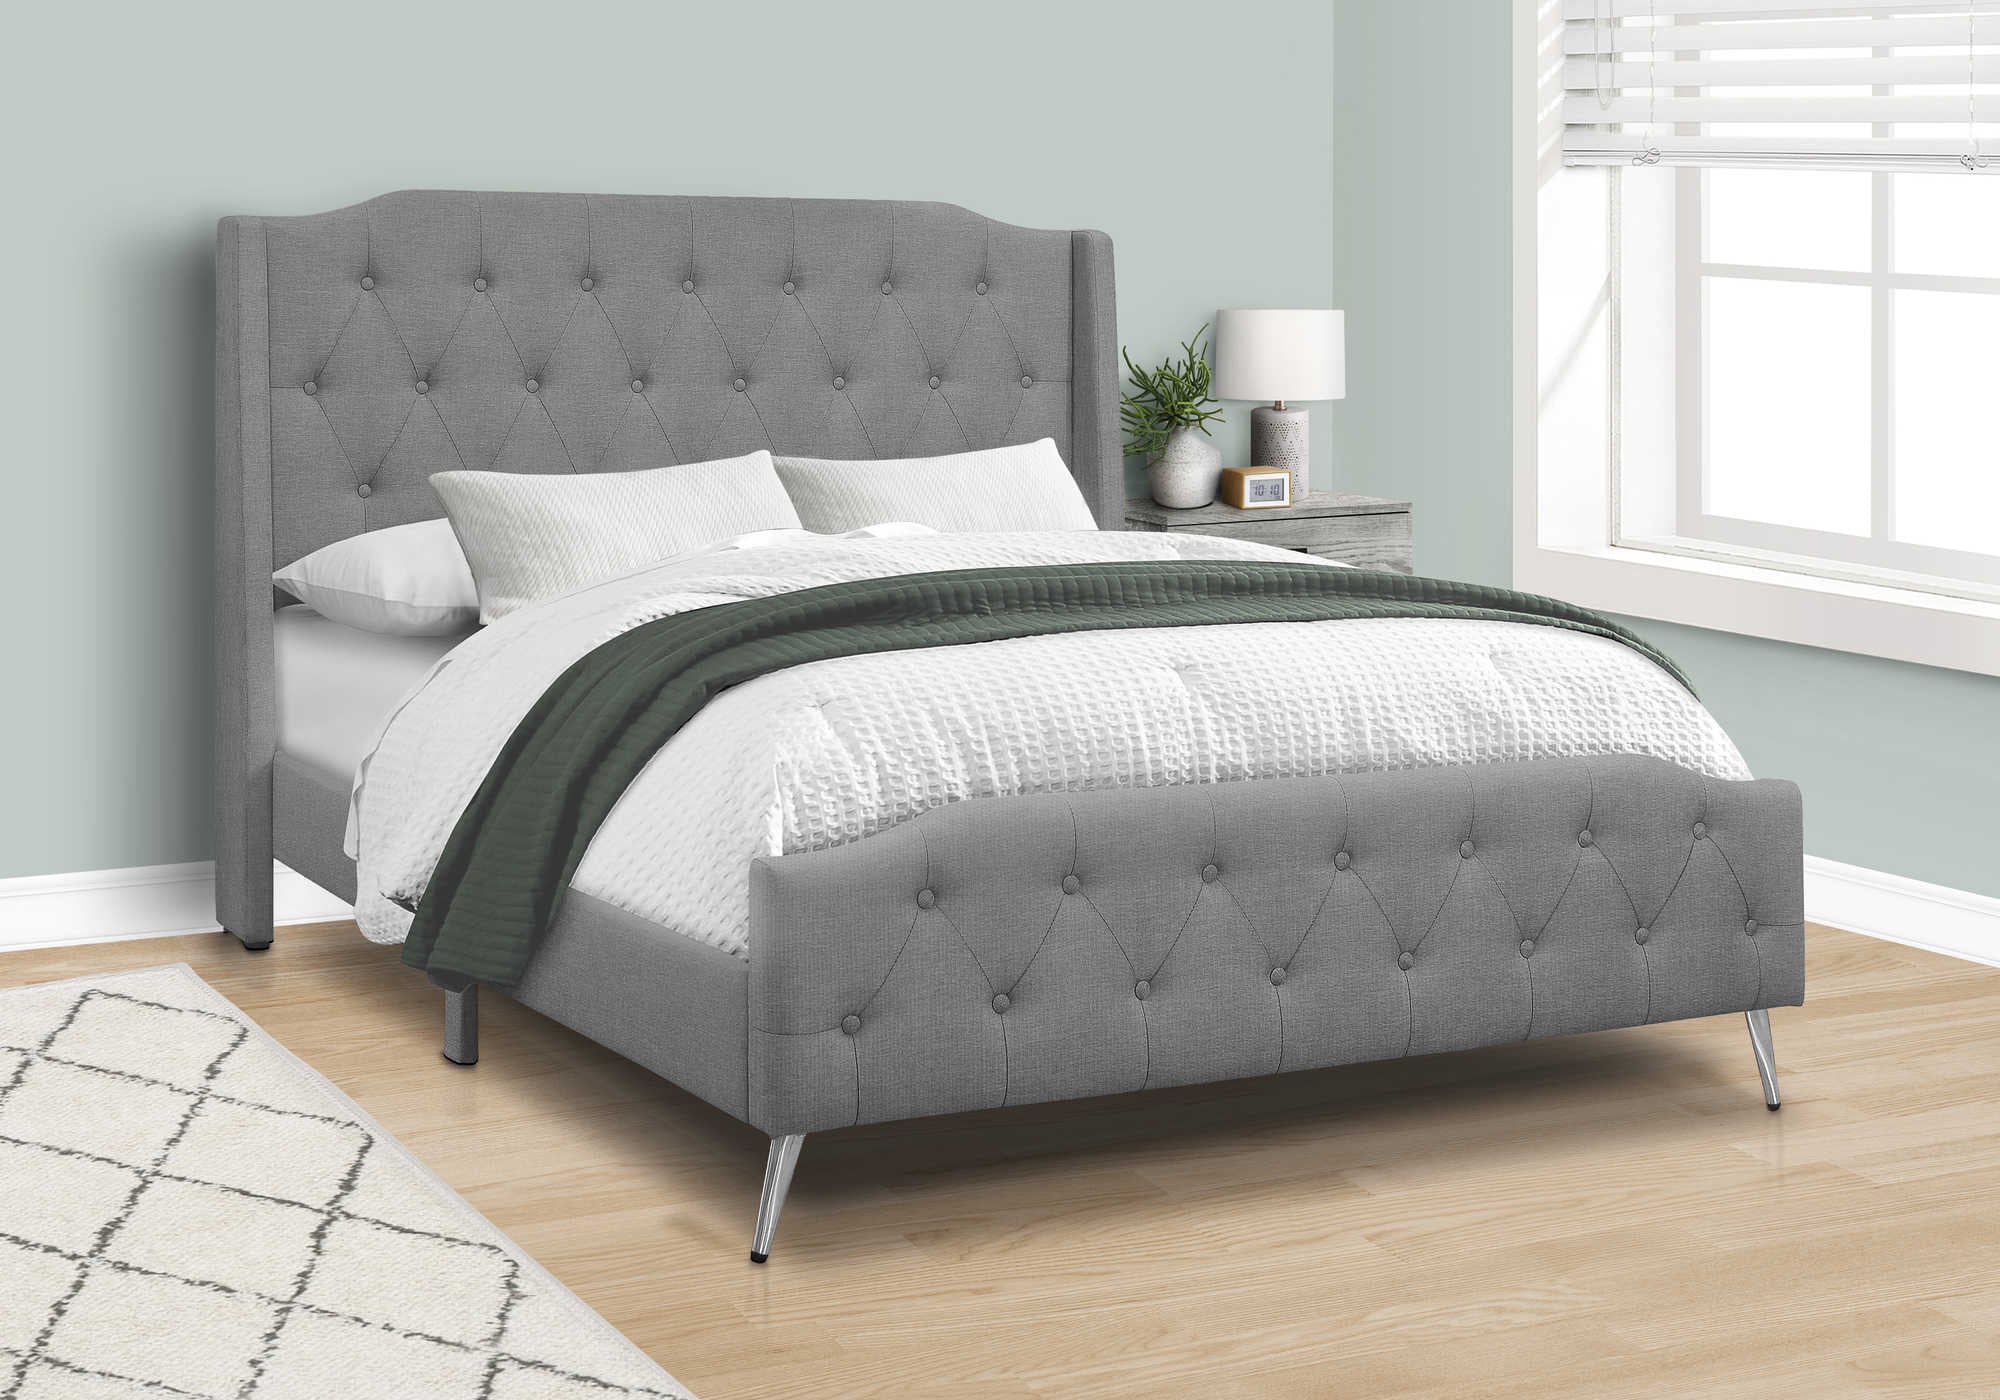 BED - QUEEN SIZE / GREY LINEN WITH CHROME METAL LEGS i 6045Q